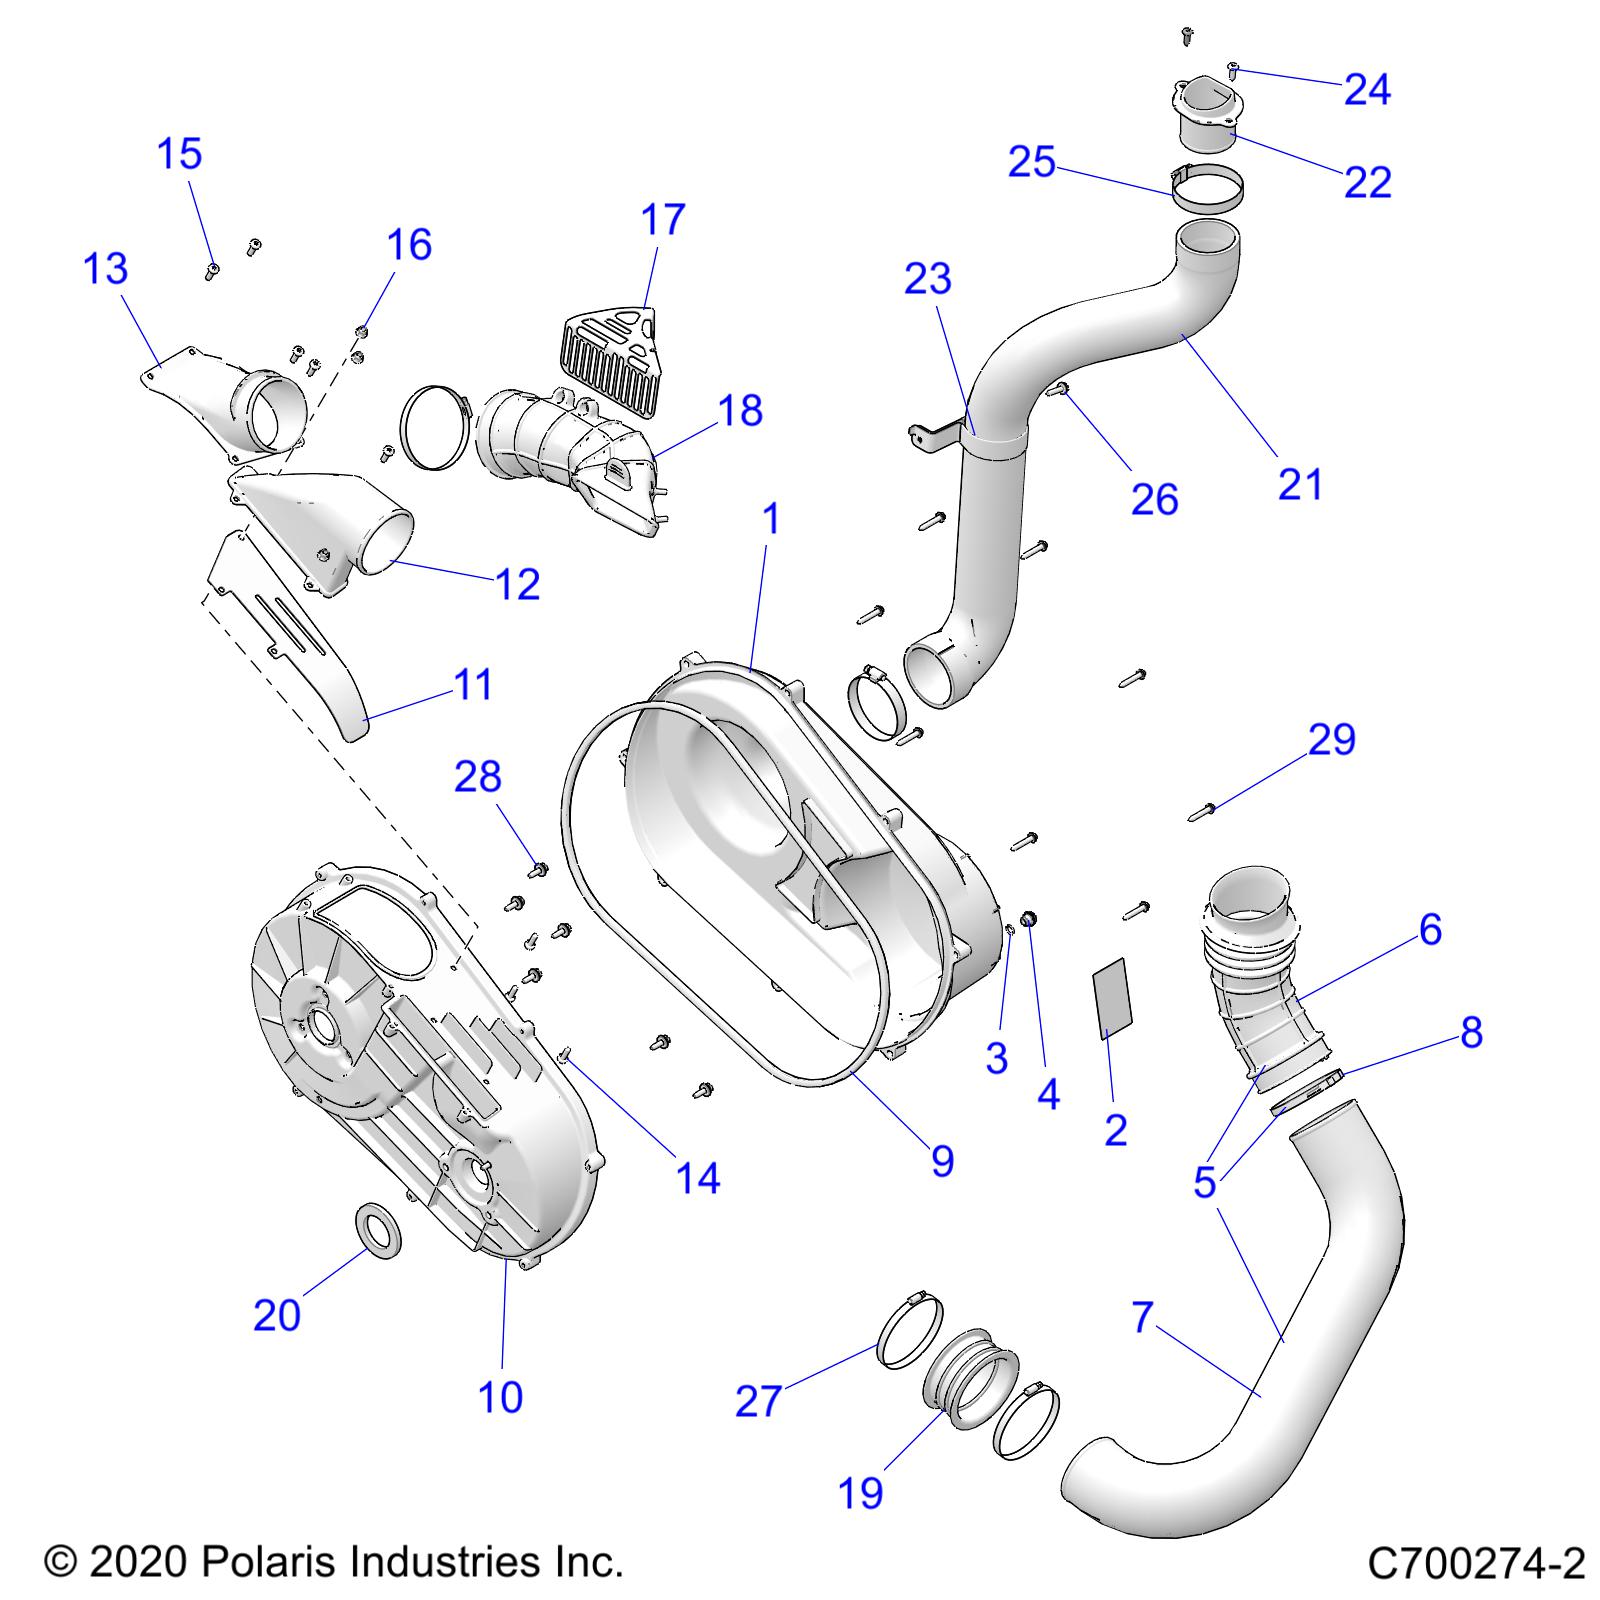 Part Number : 5813639 INTAKE BOOT CLUTCH